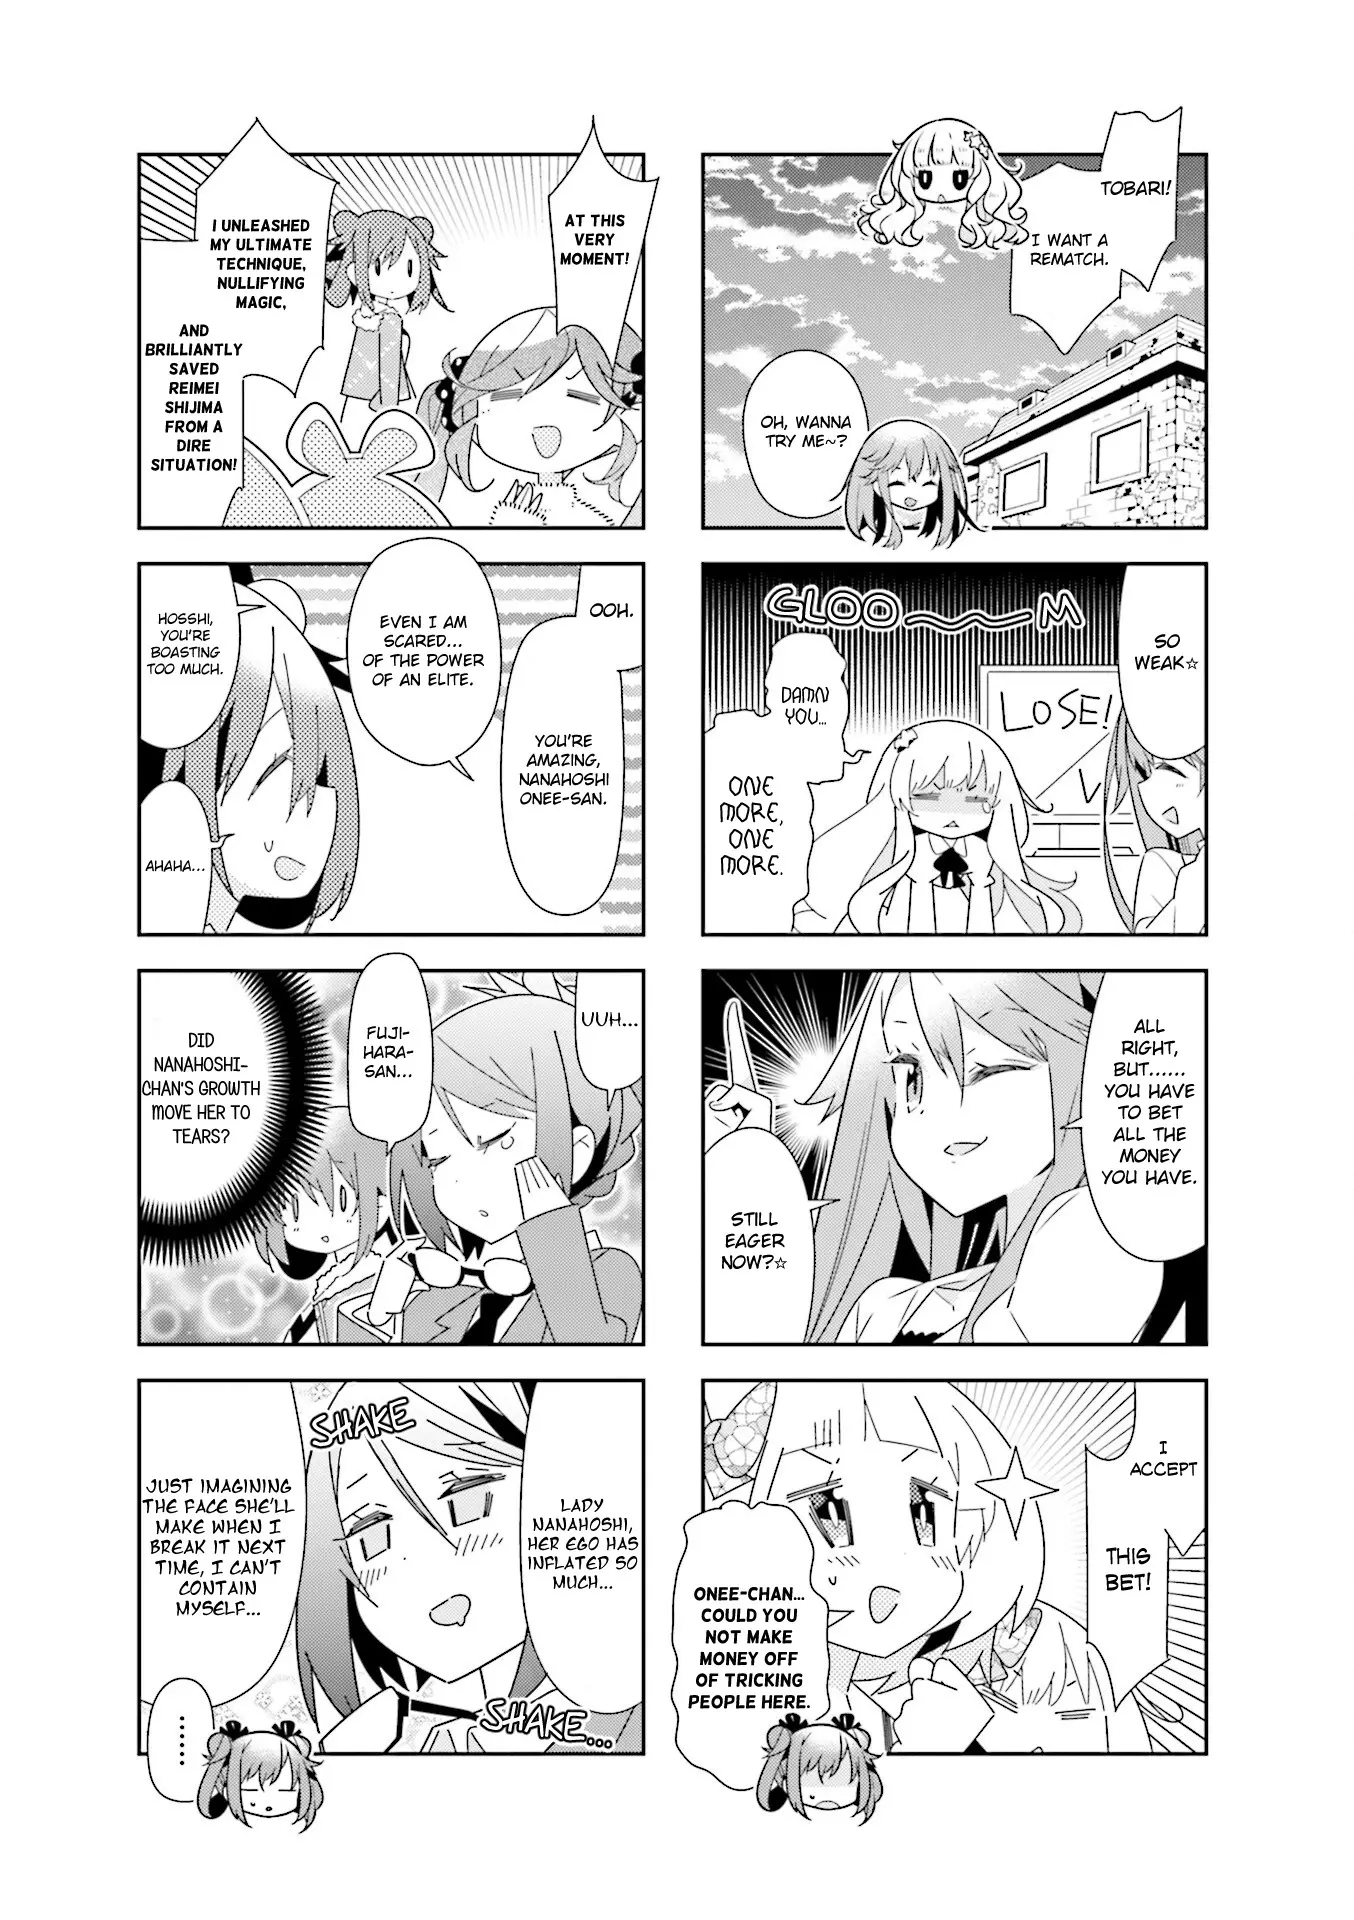 The Life After Retirement Of Magical Girls - 39 page 5-20f957f2